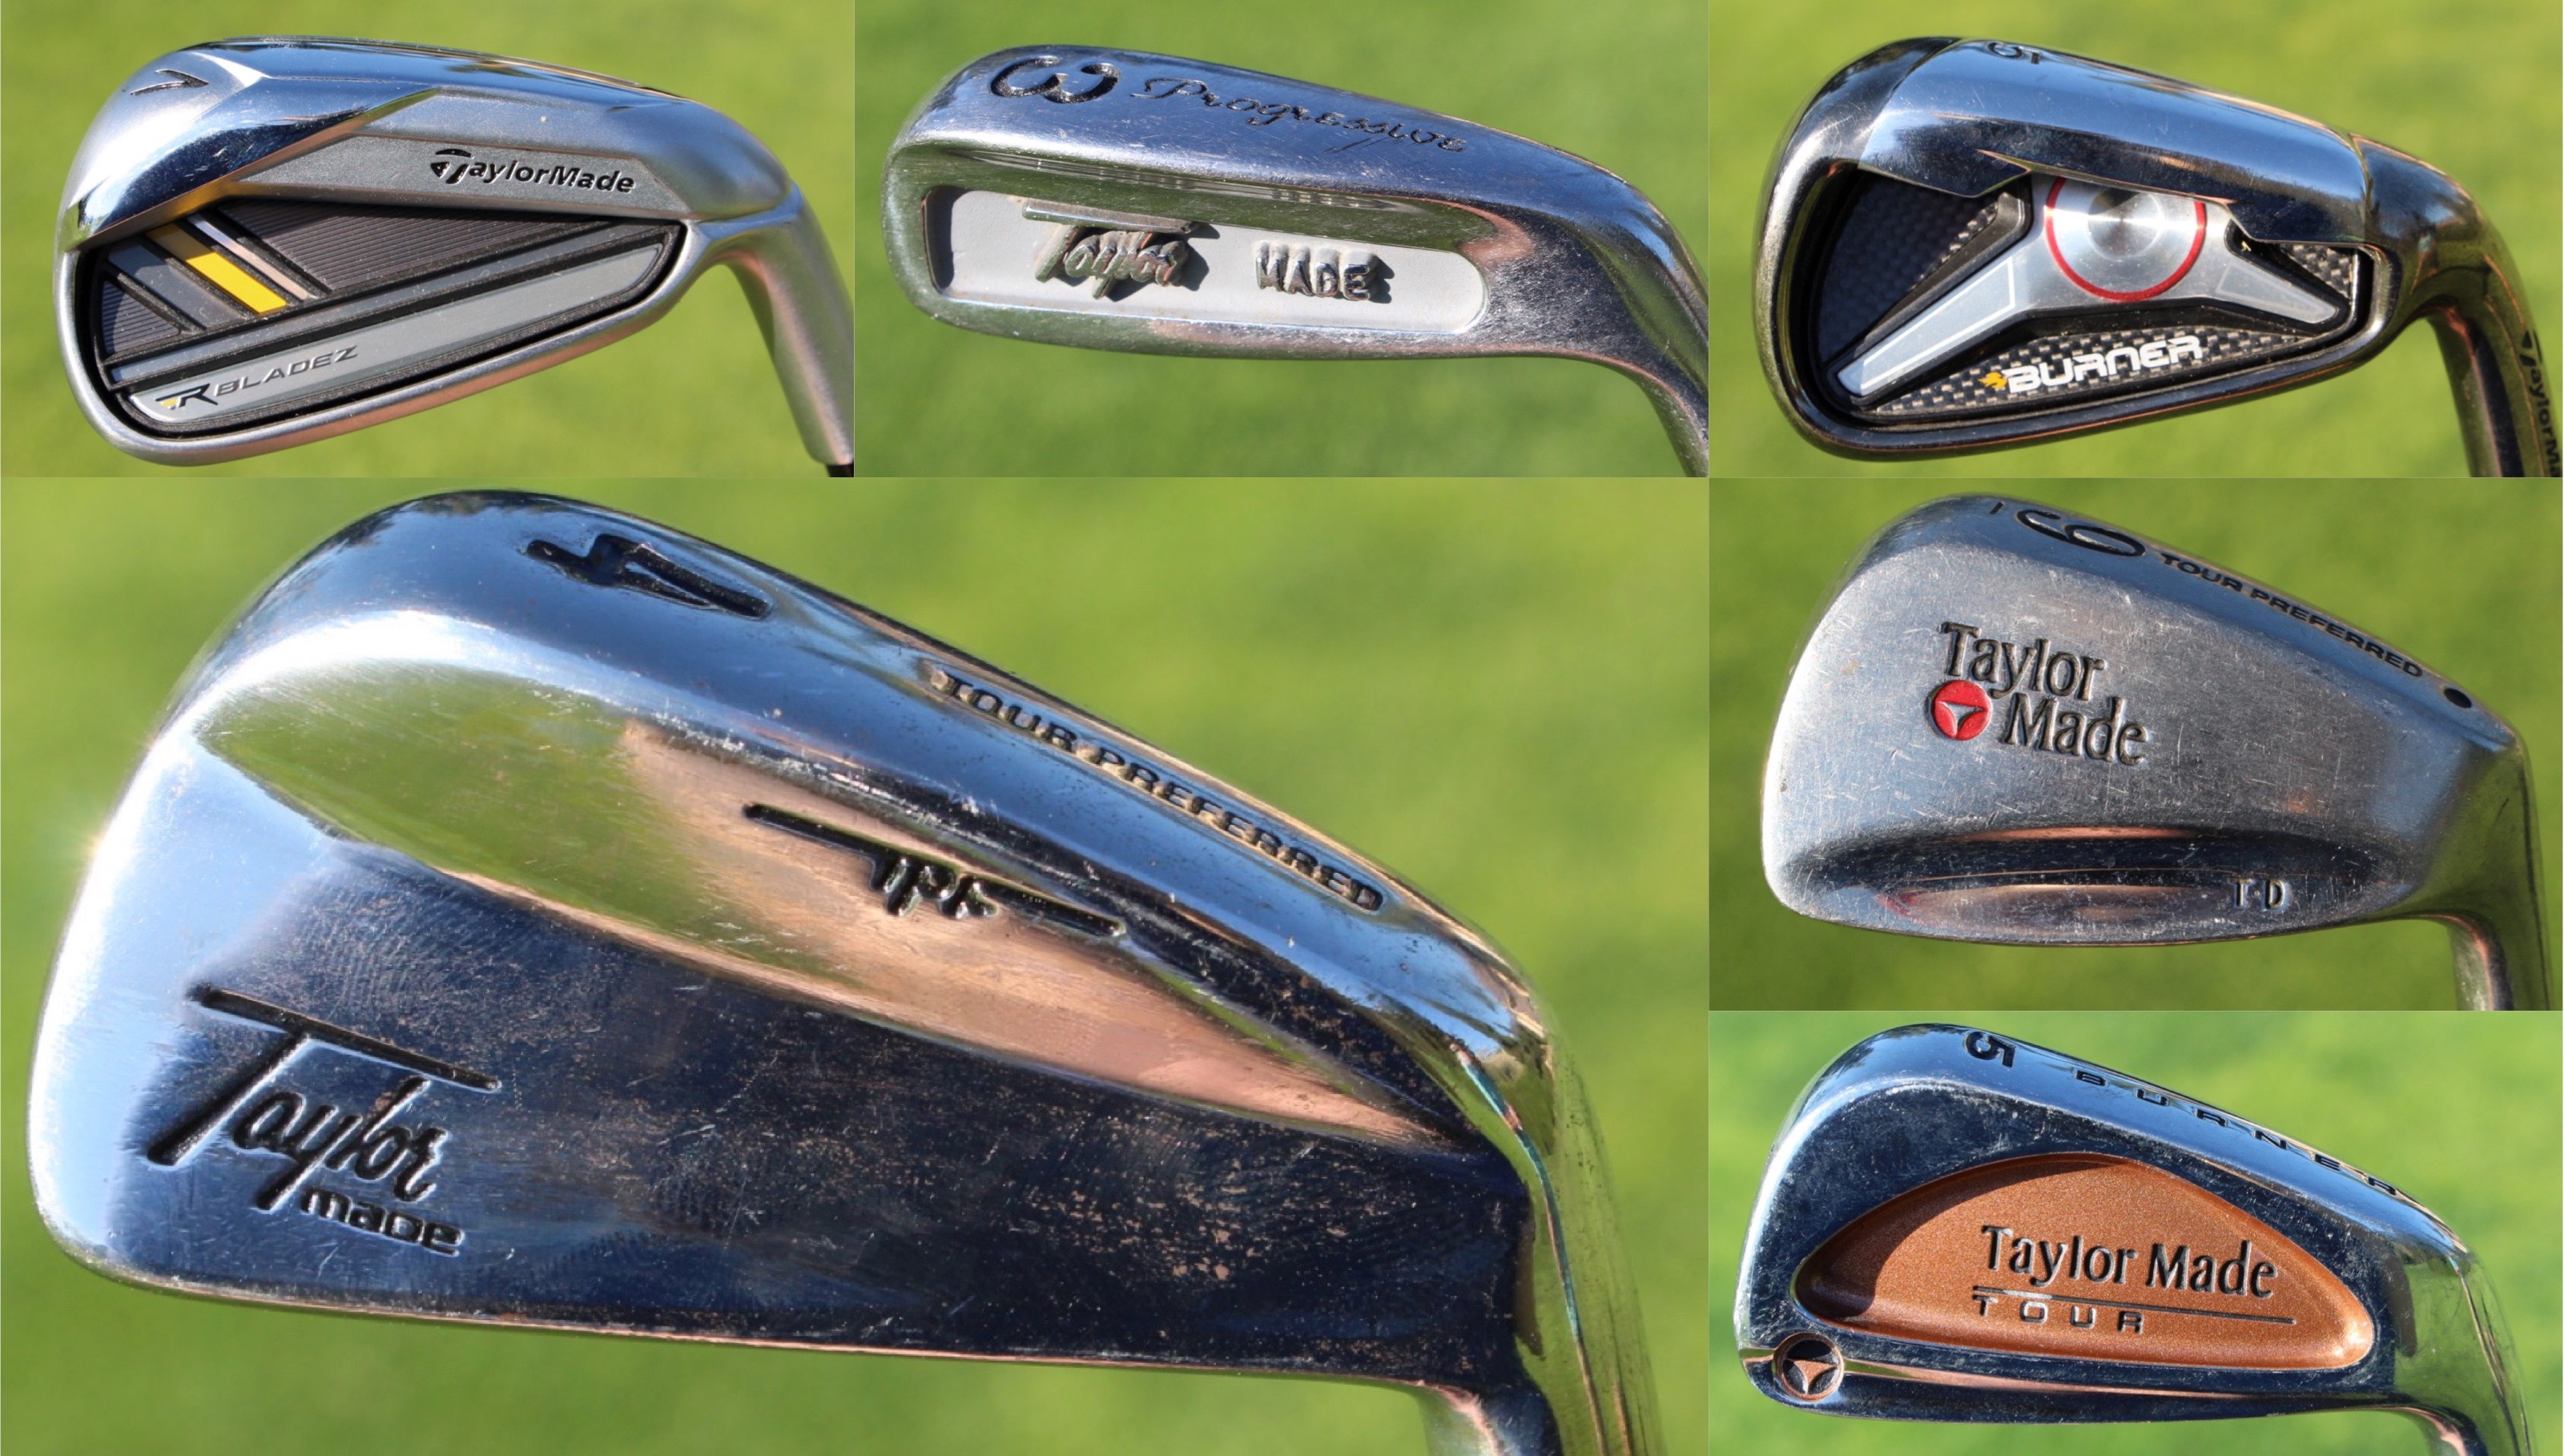 Photos of TaylorMade irons from the last 35 years – GolfWRX